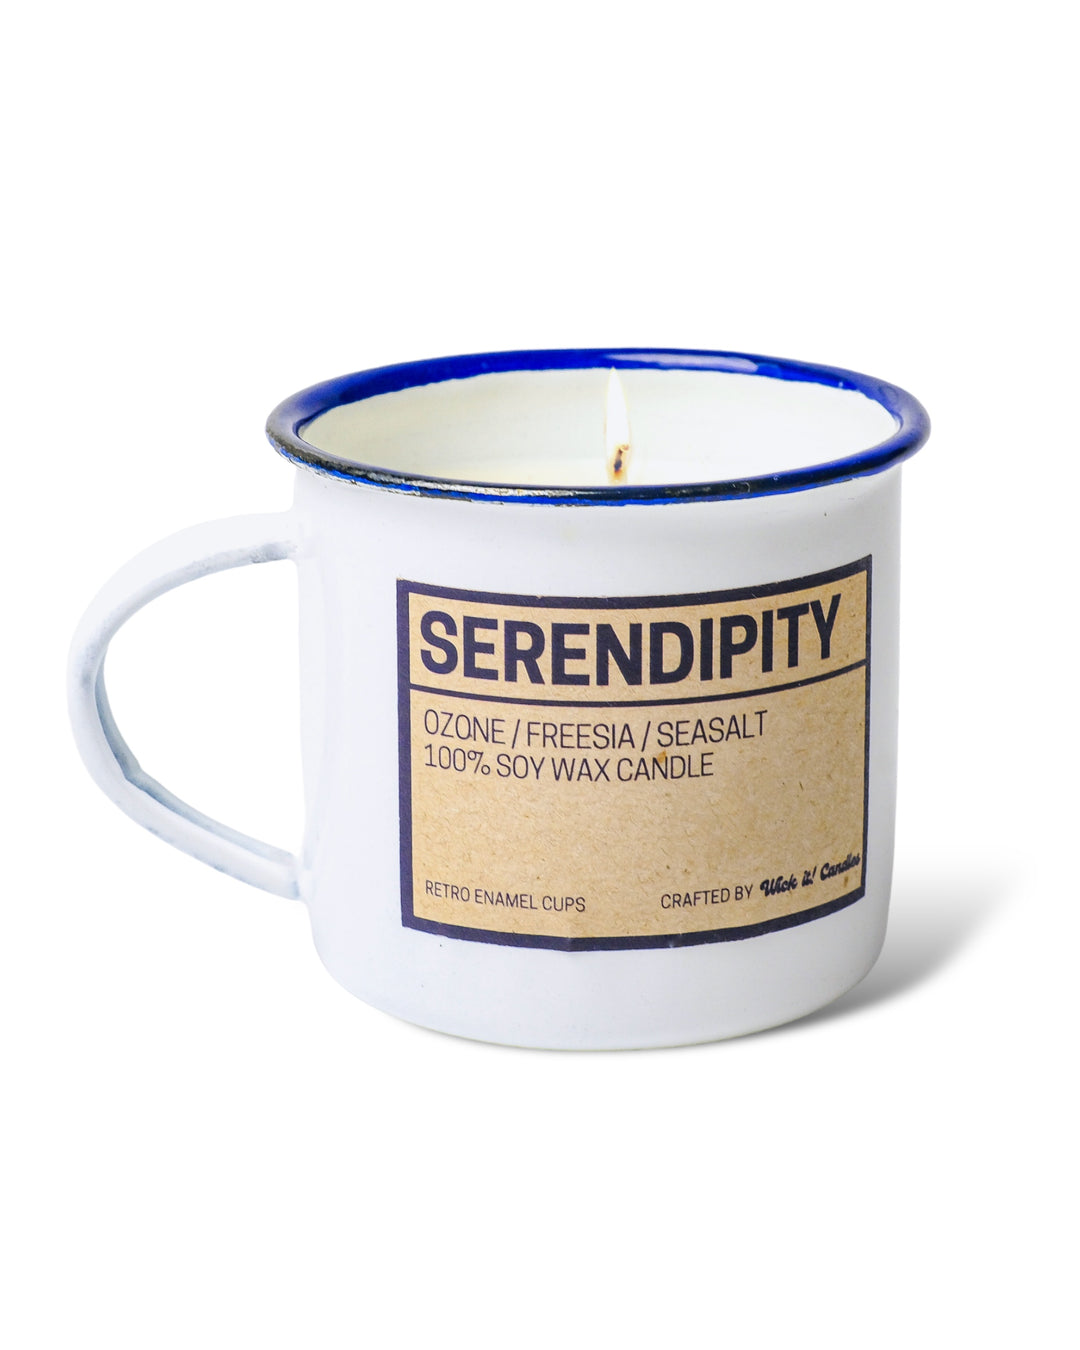 Wick It! Candles Serendipity (Ozone/Freesia/Seasalt) Scented Candle